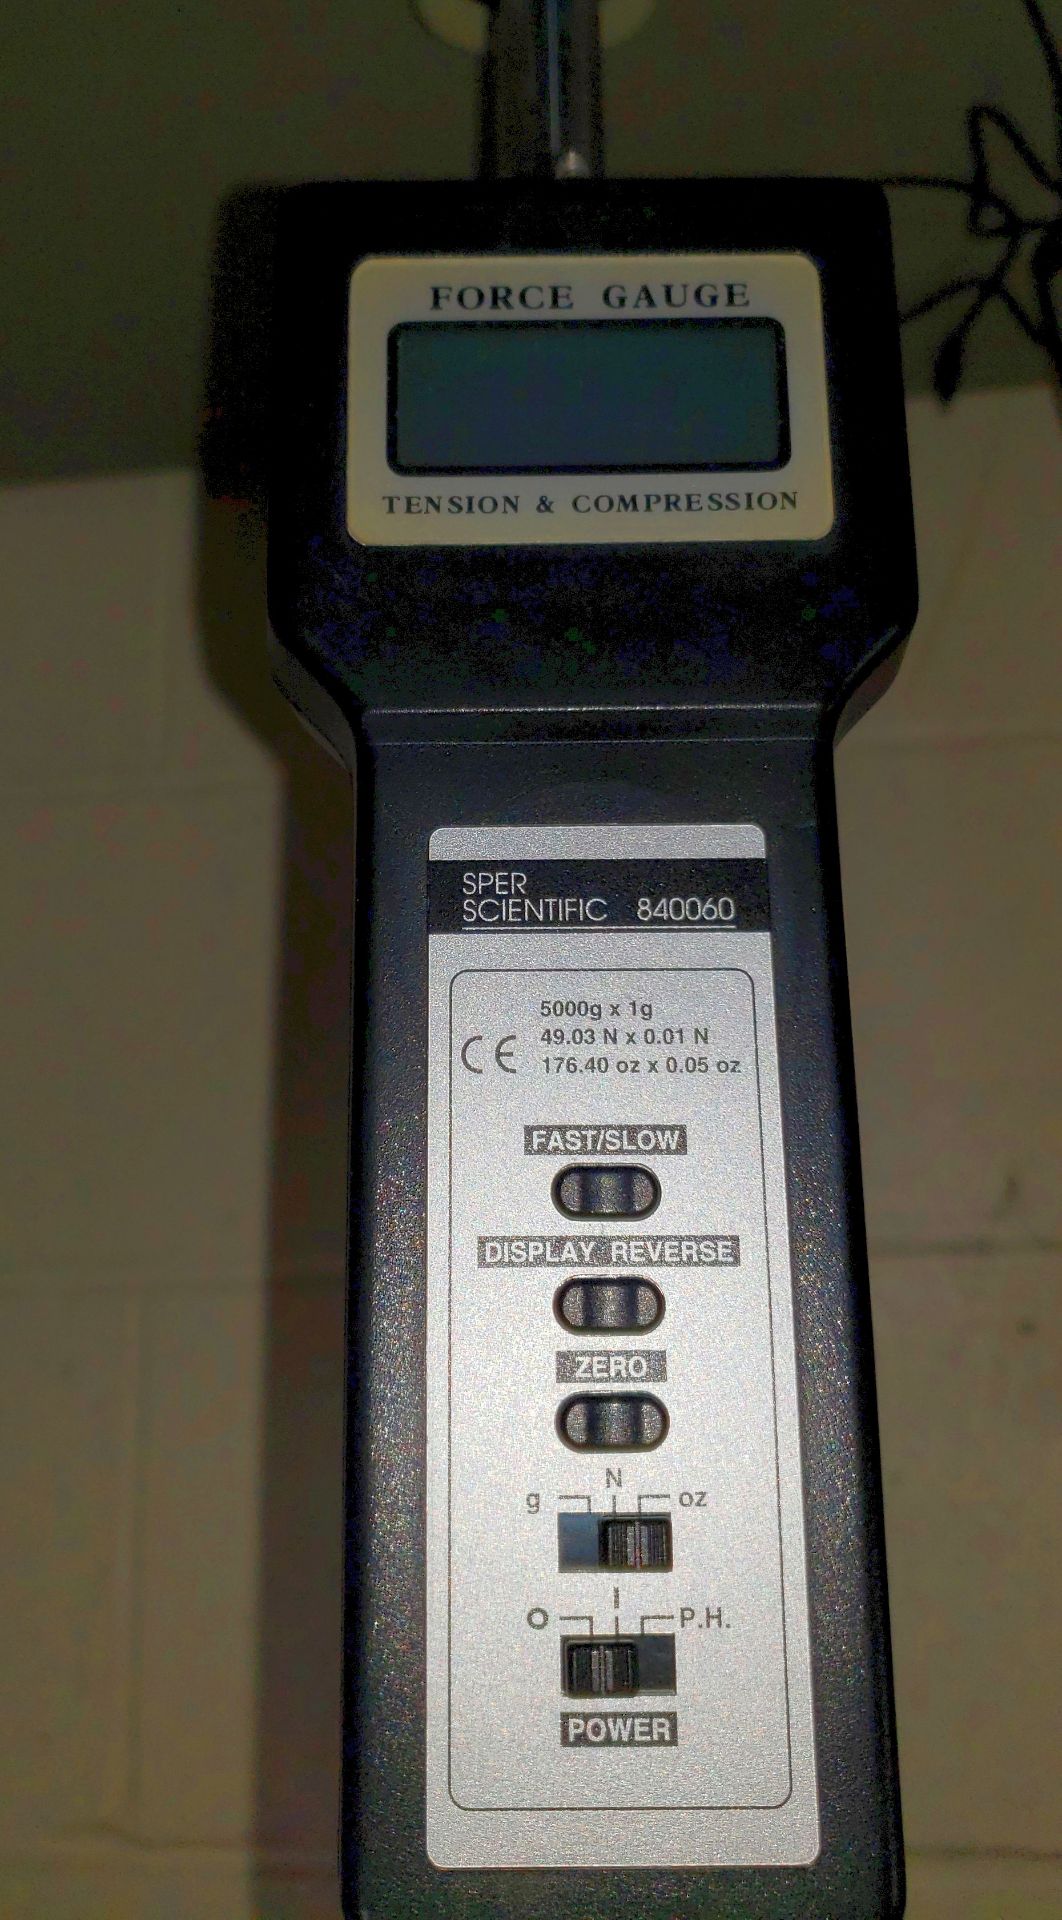 Force Guage Tension & Compression Tester - Image 2 of 3